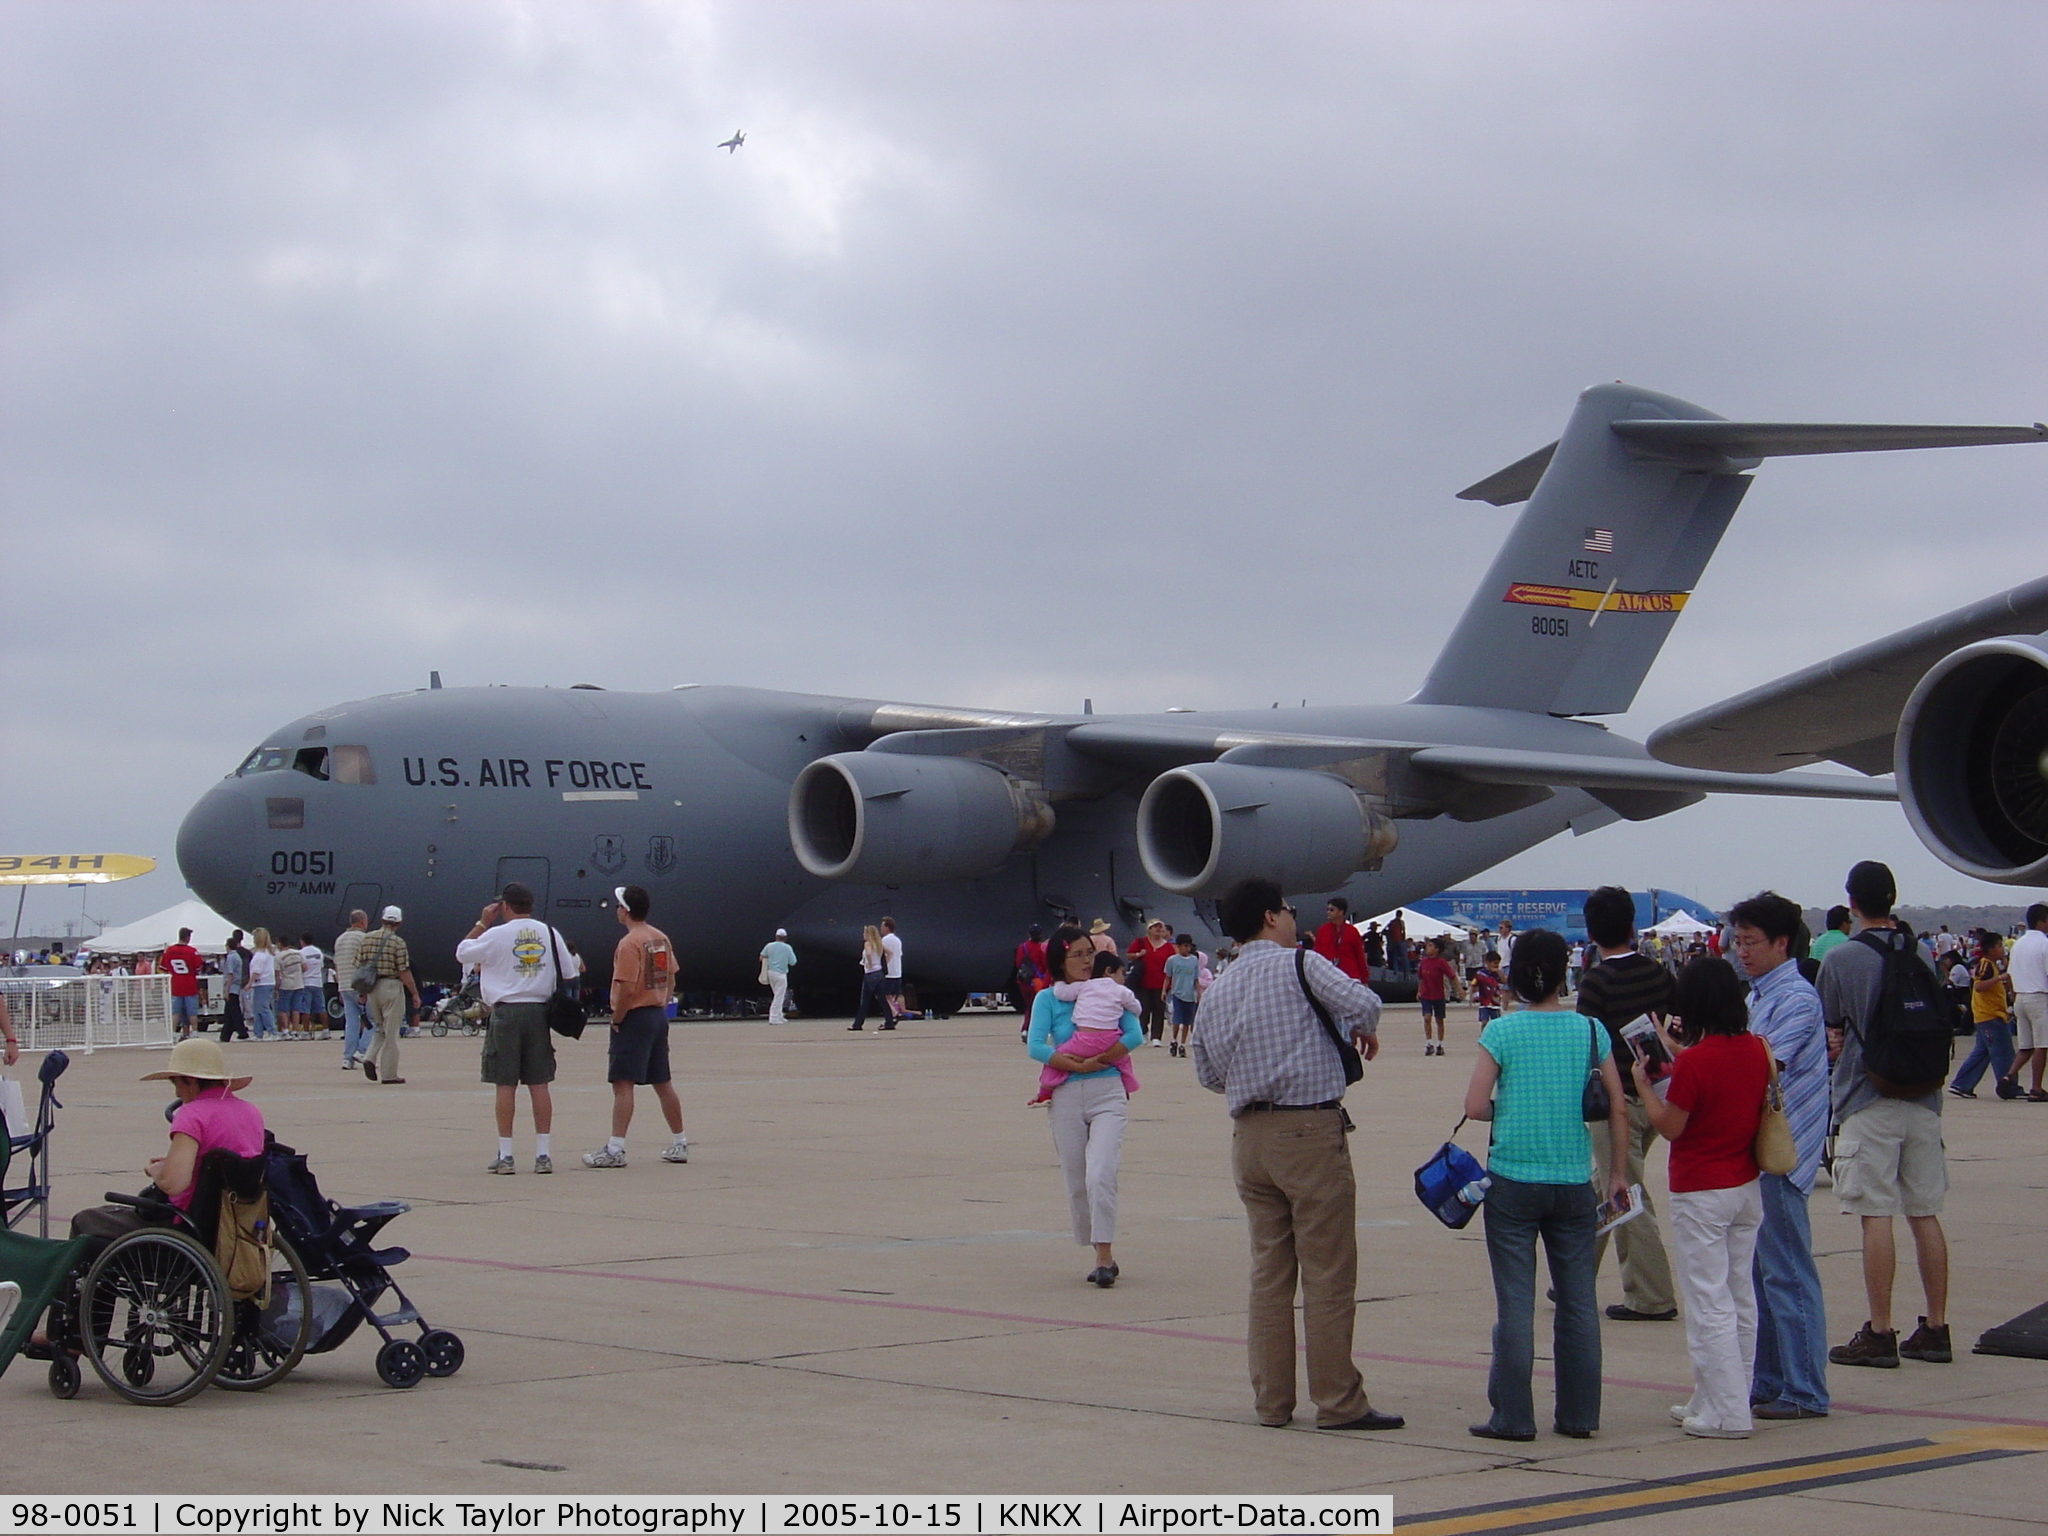 98-0051, 1999 Boeing C-17A Globemaster III C/N 50055/P-51, On display with the 97th AMW Altus AFB Oklahoma at the MCAS Miramar Airshow 05'.